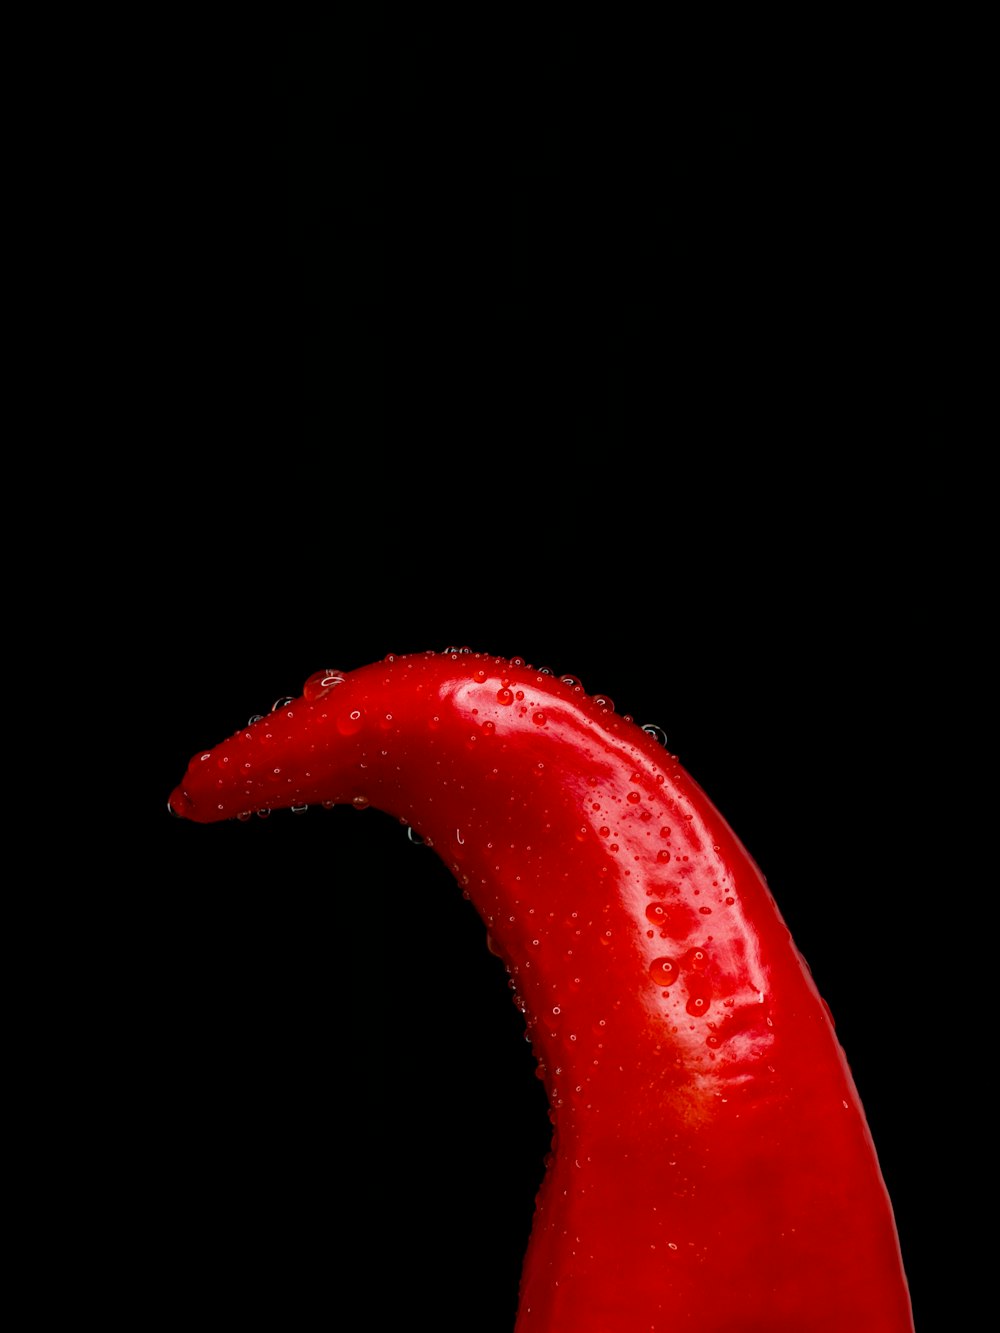 red chili pepper in black background